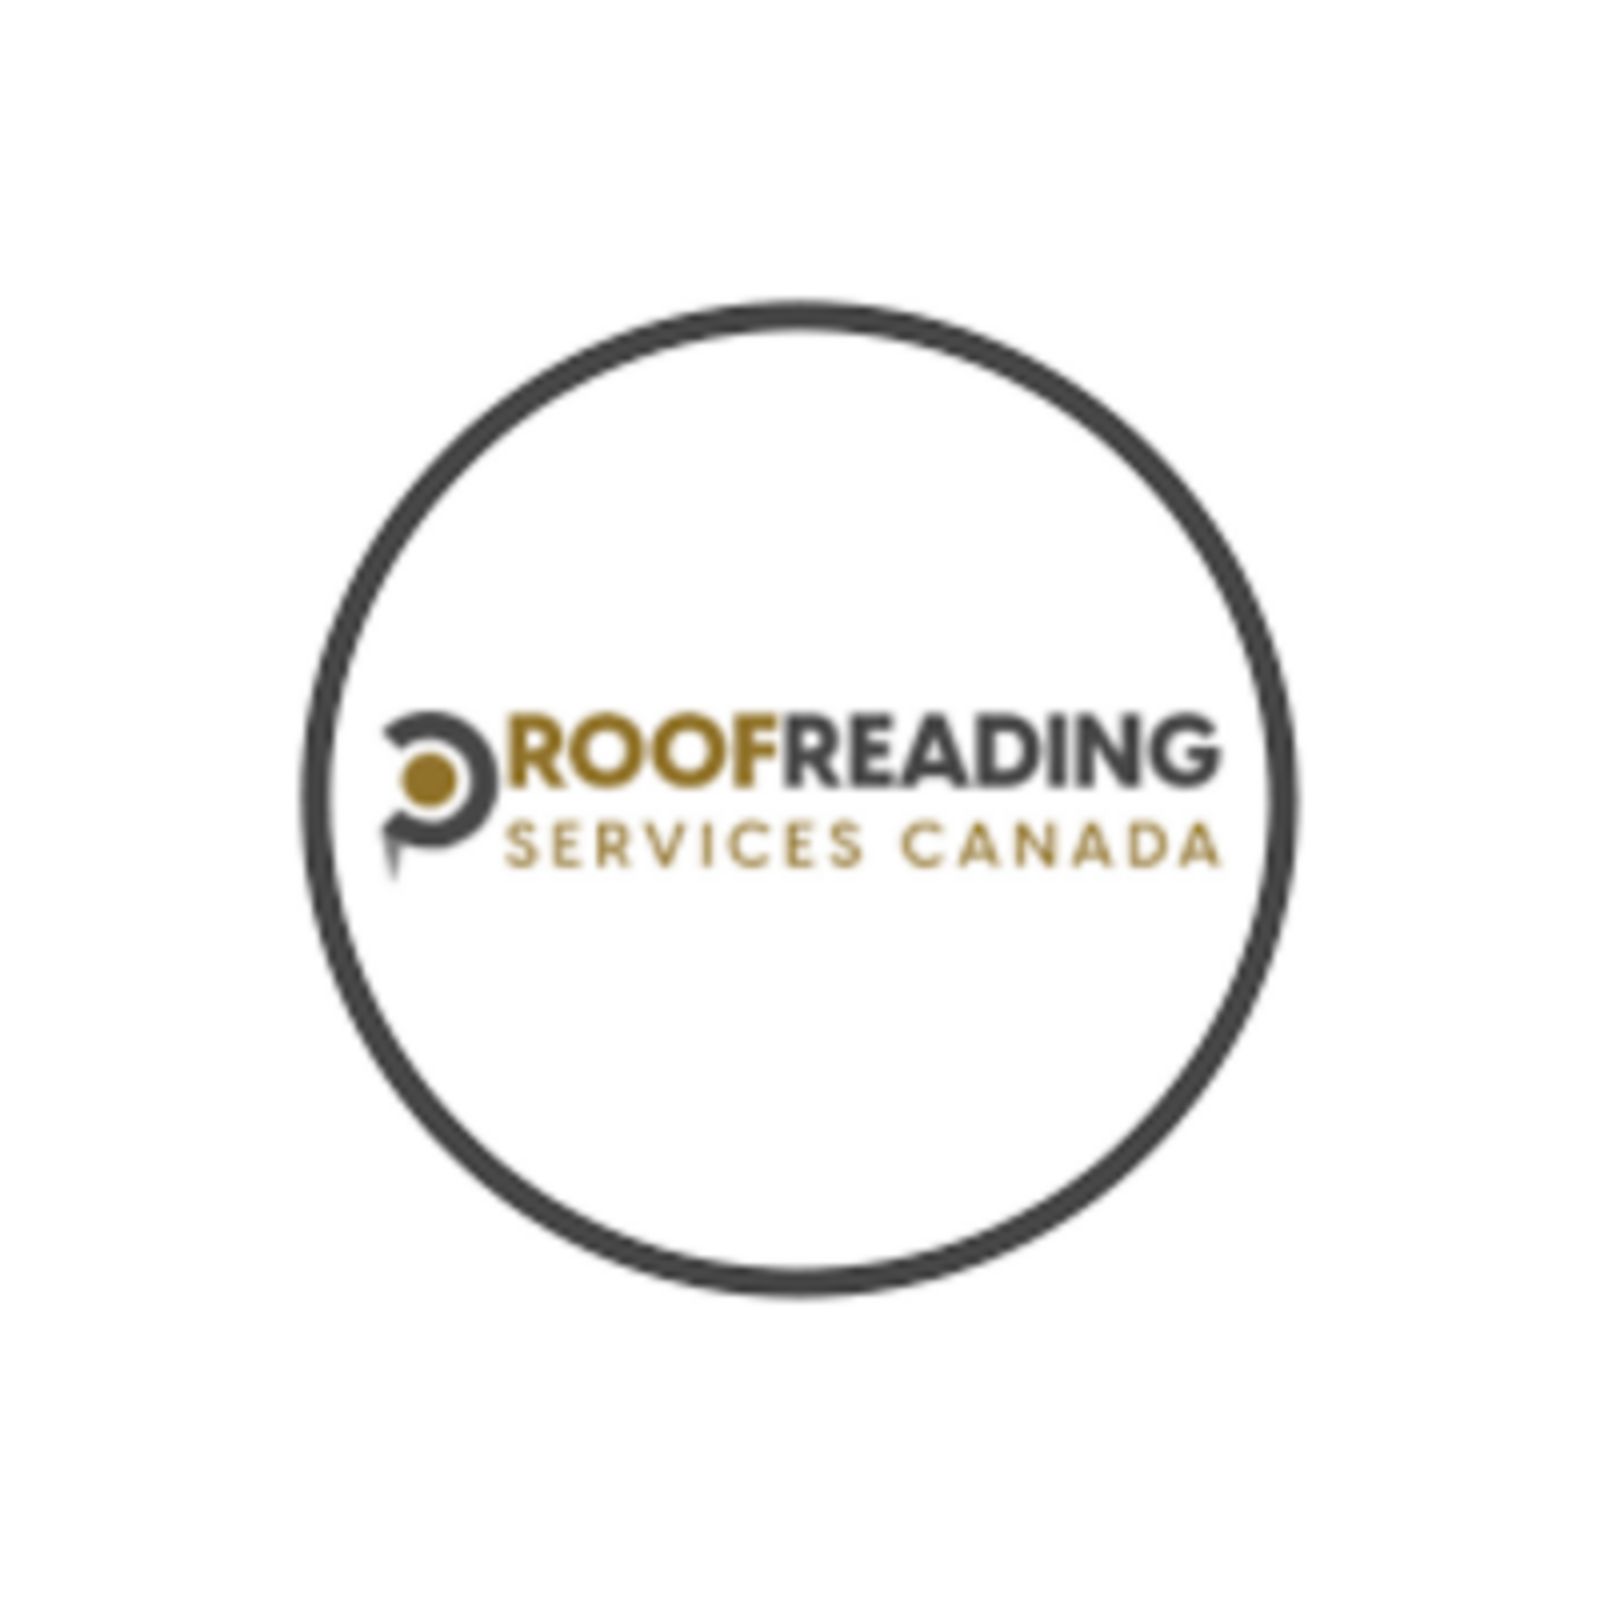 Proofreading Services Canada